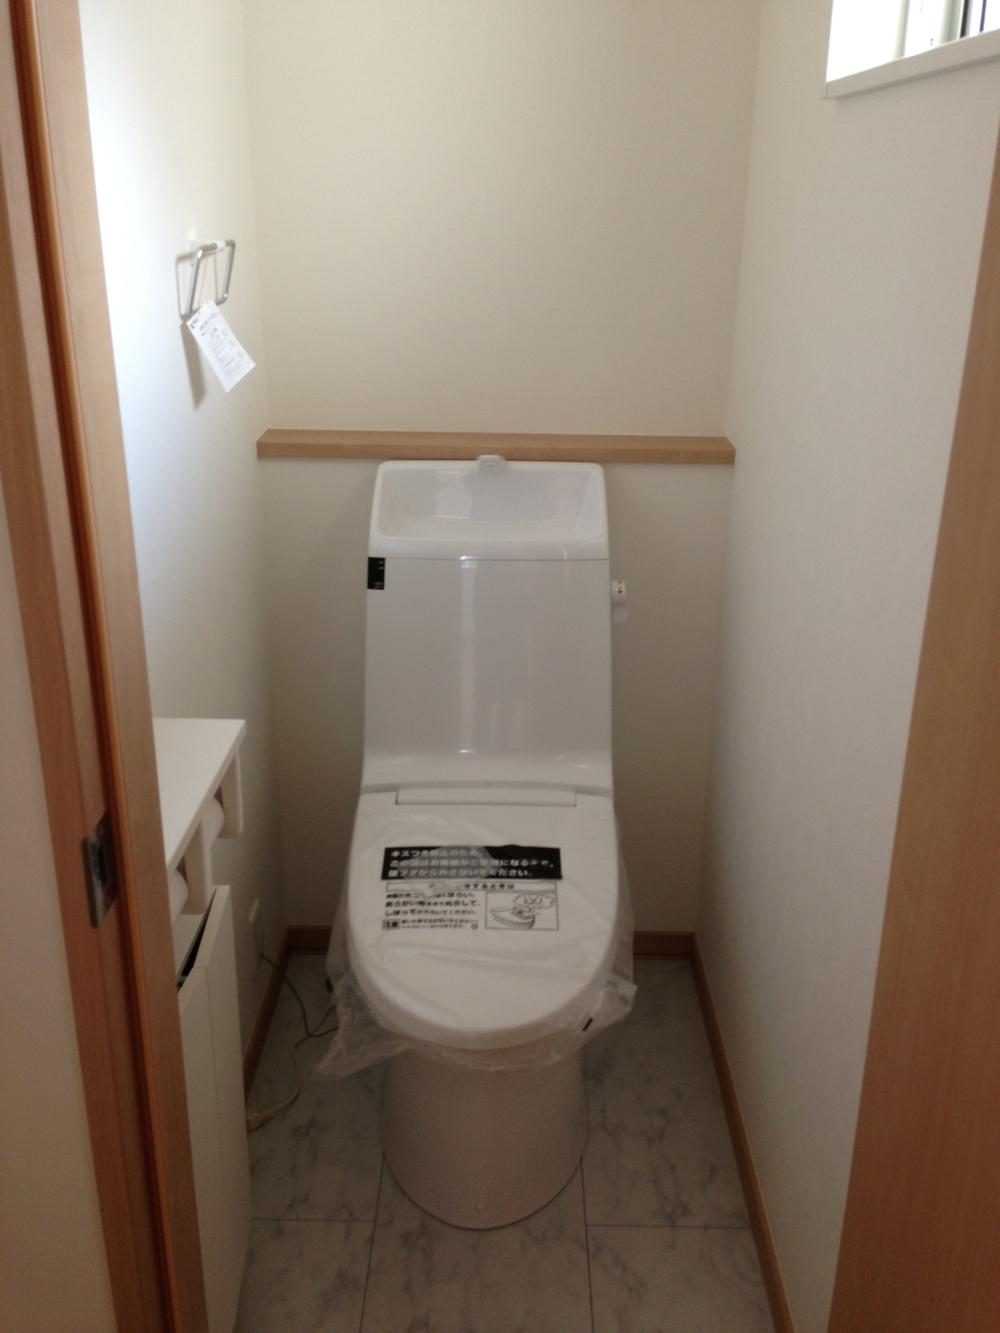 Toilet. Finished product the same specification